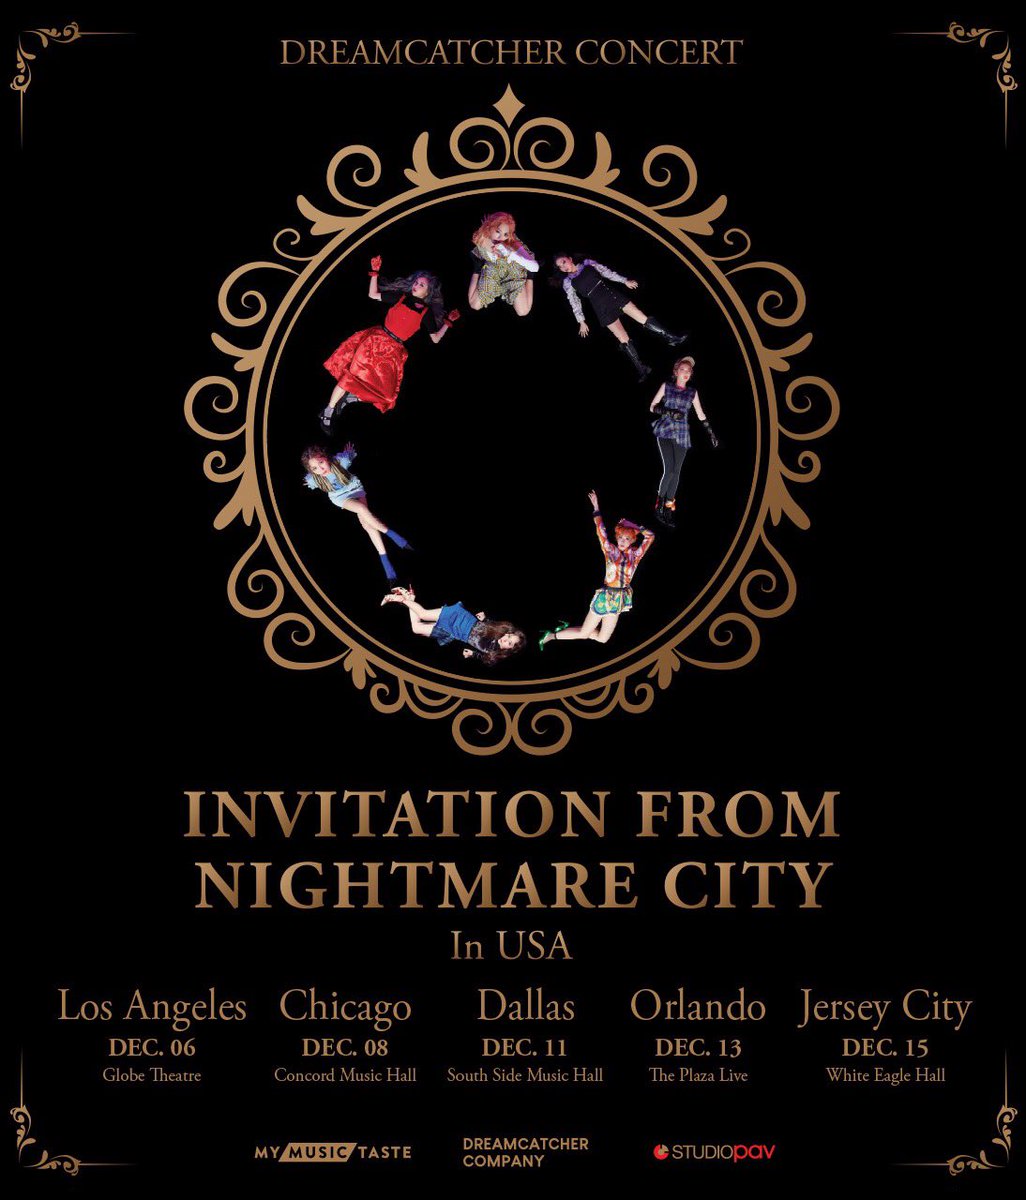 Dreamcatcher’s ‘Invitation From Nightmare City’ tour coming to LA